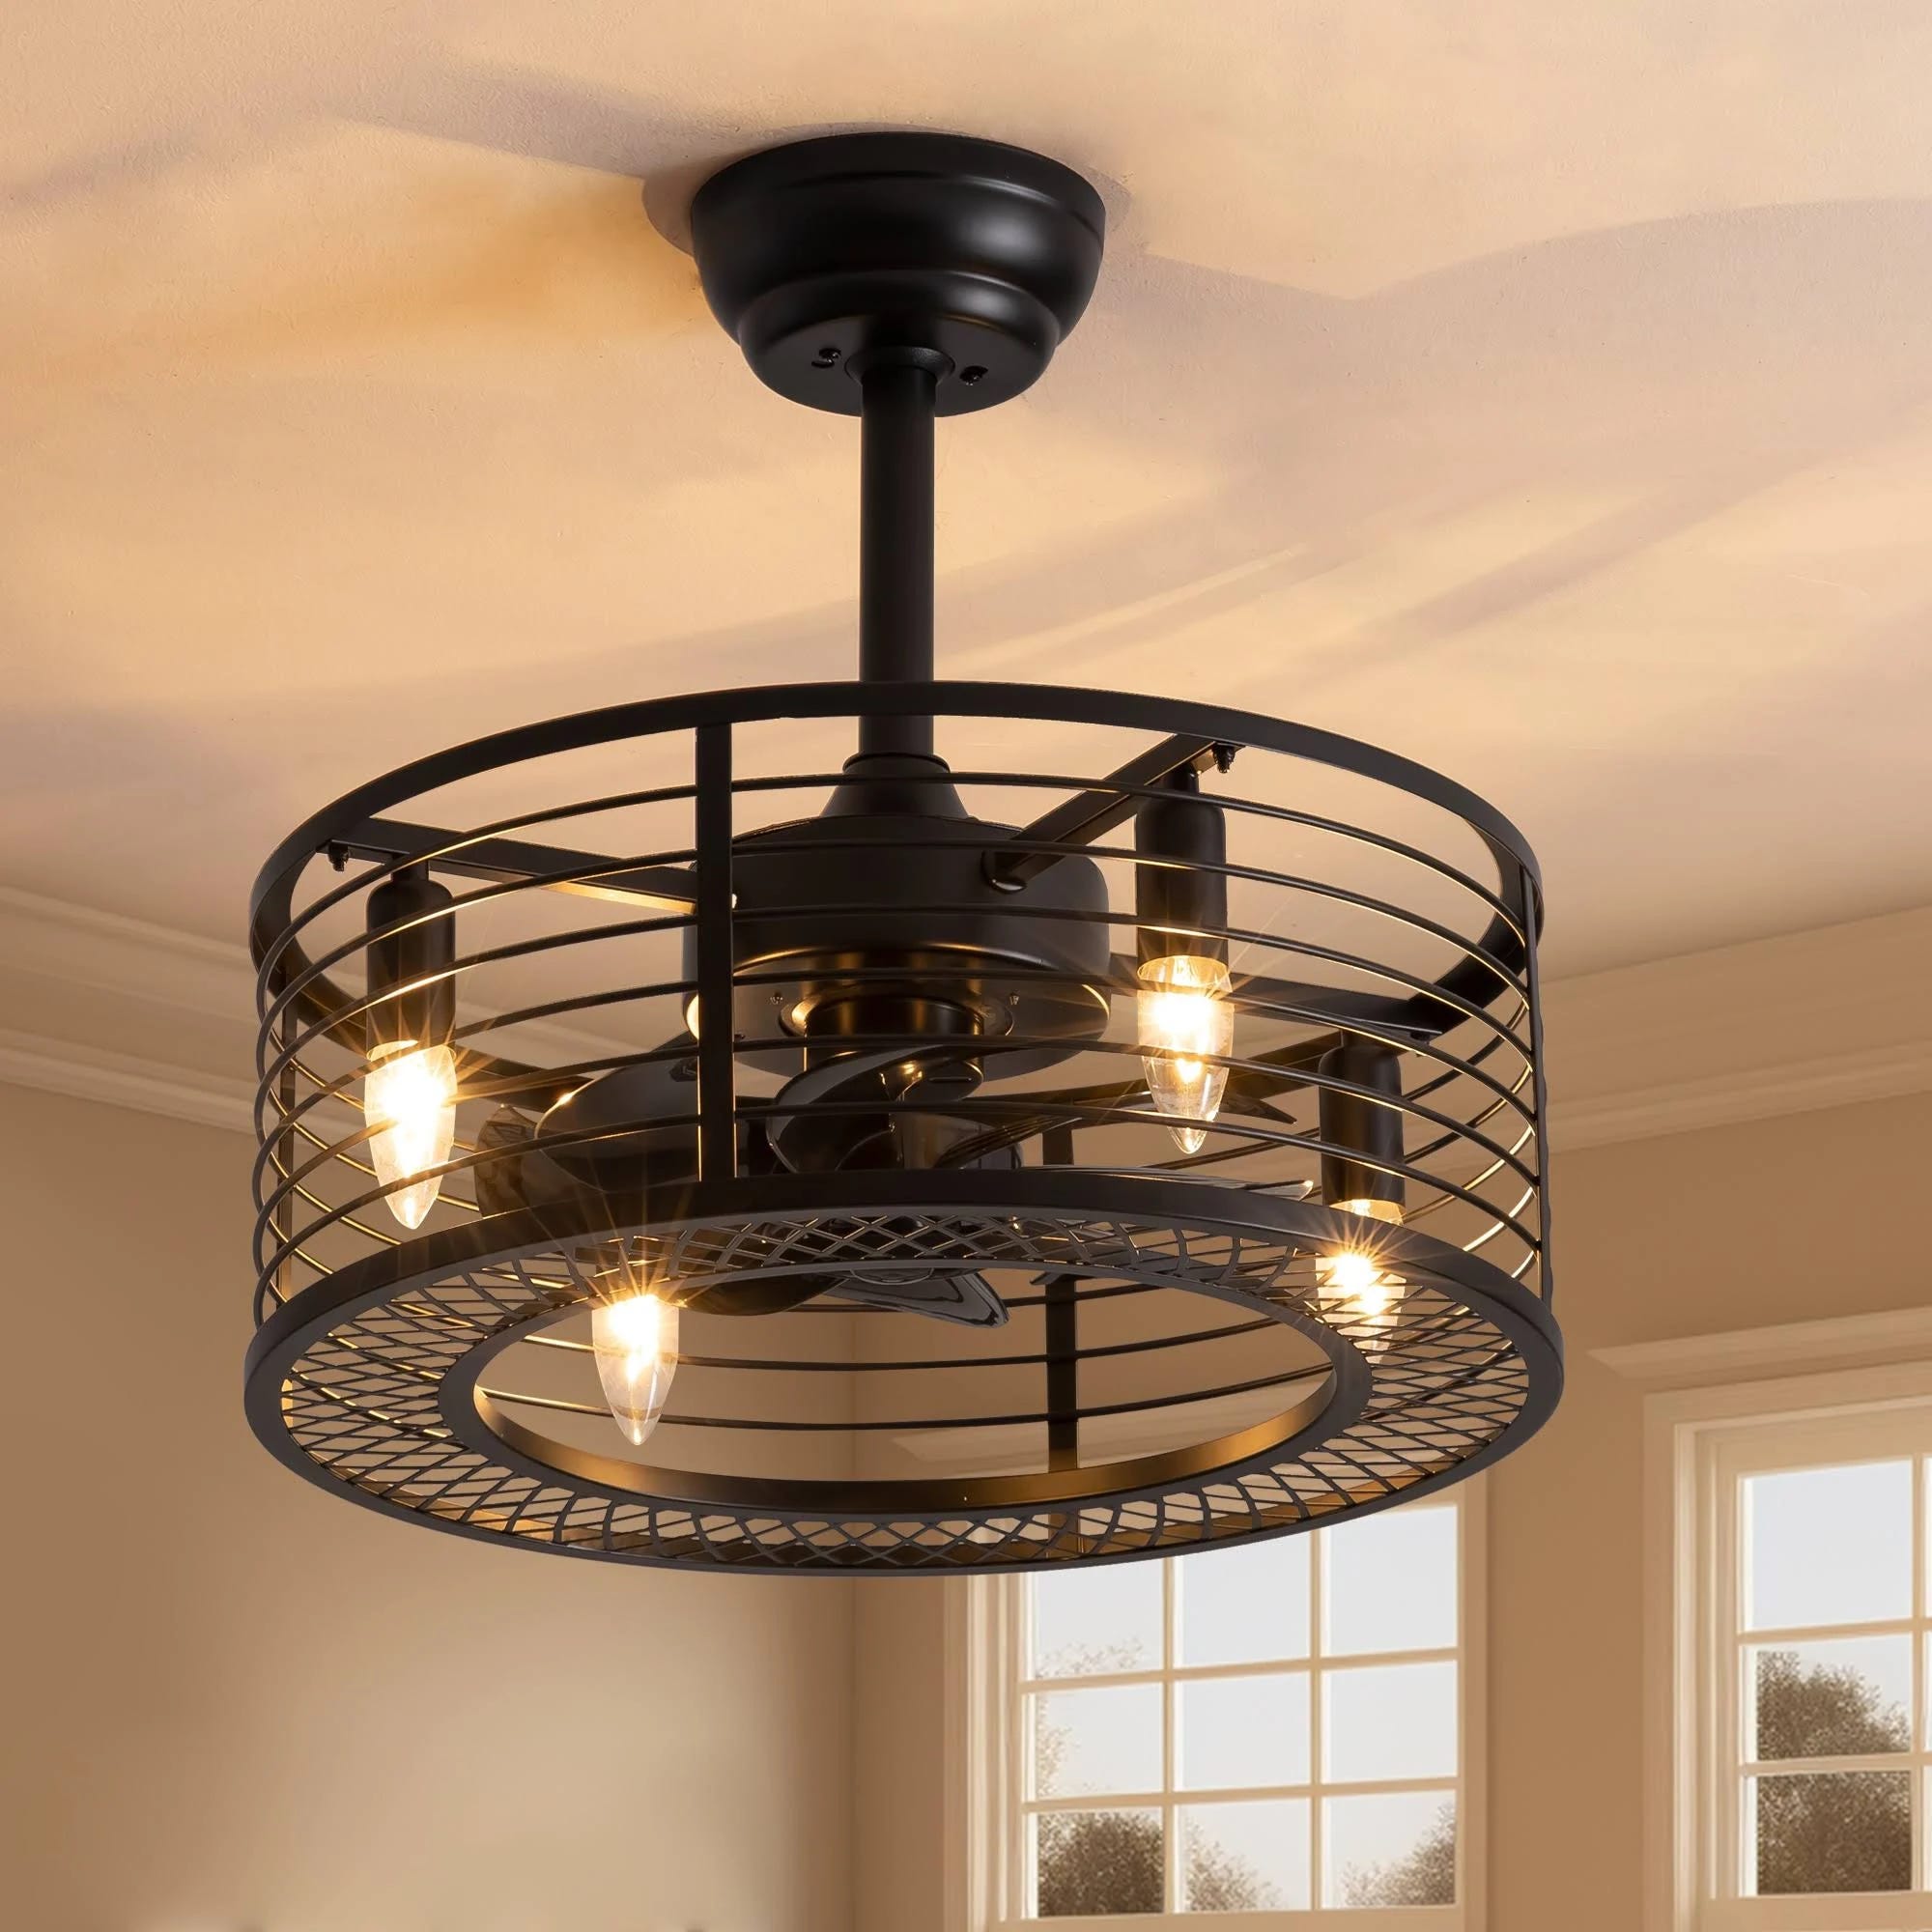 Antoine Modern Enclosed Industrial Farmhouse Ceiling Fan with Light and Remote | Image